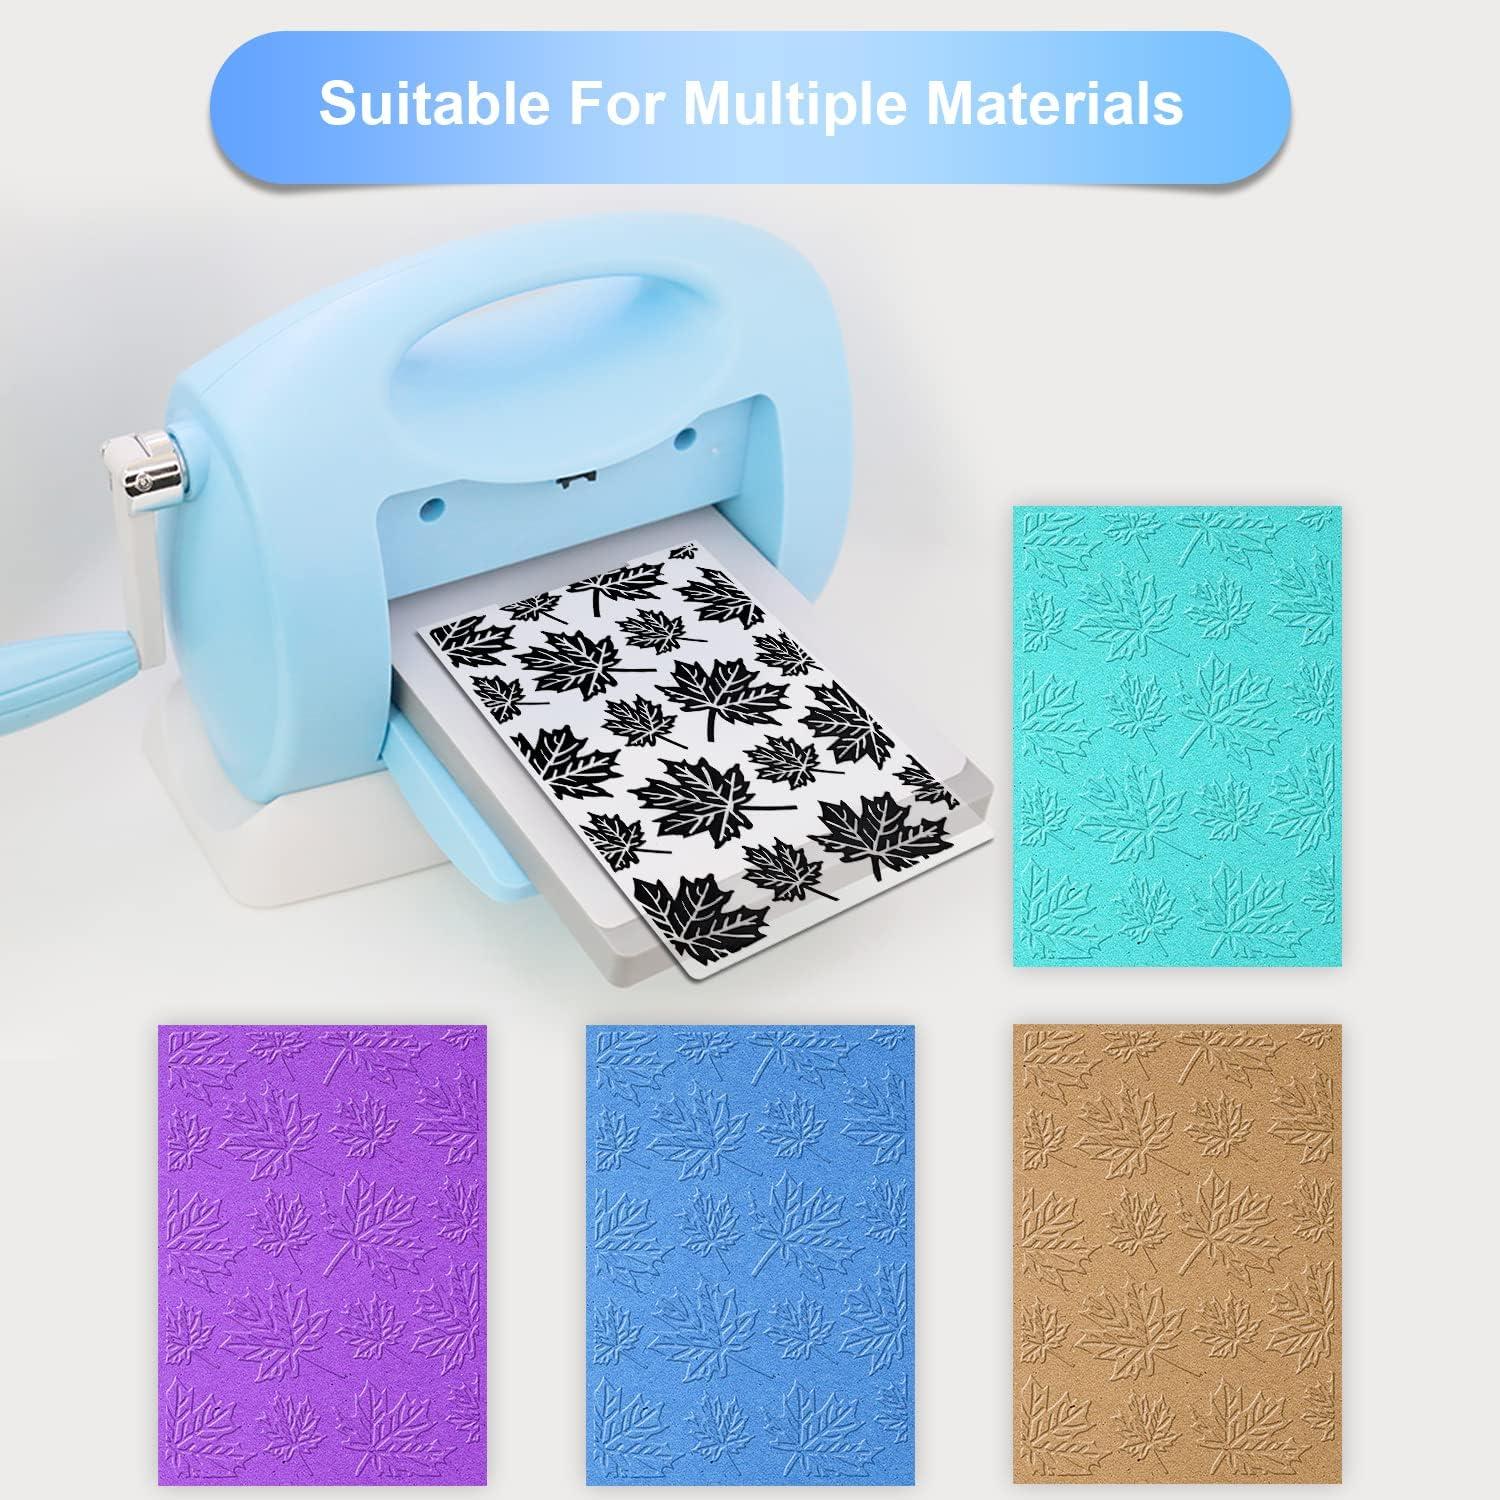 Creative Craft Buddy Plastic Paper Cutting Embossing, 58% OFF